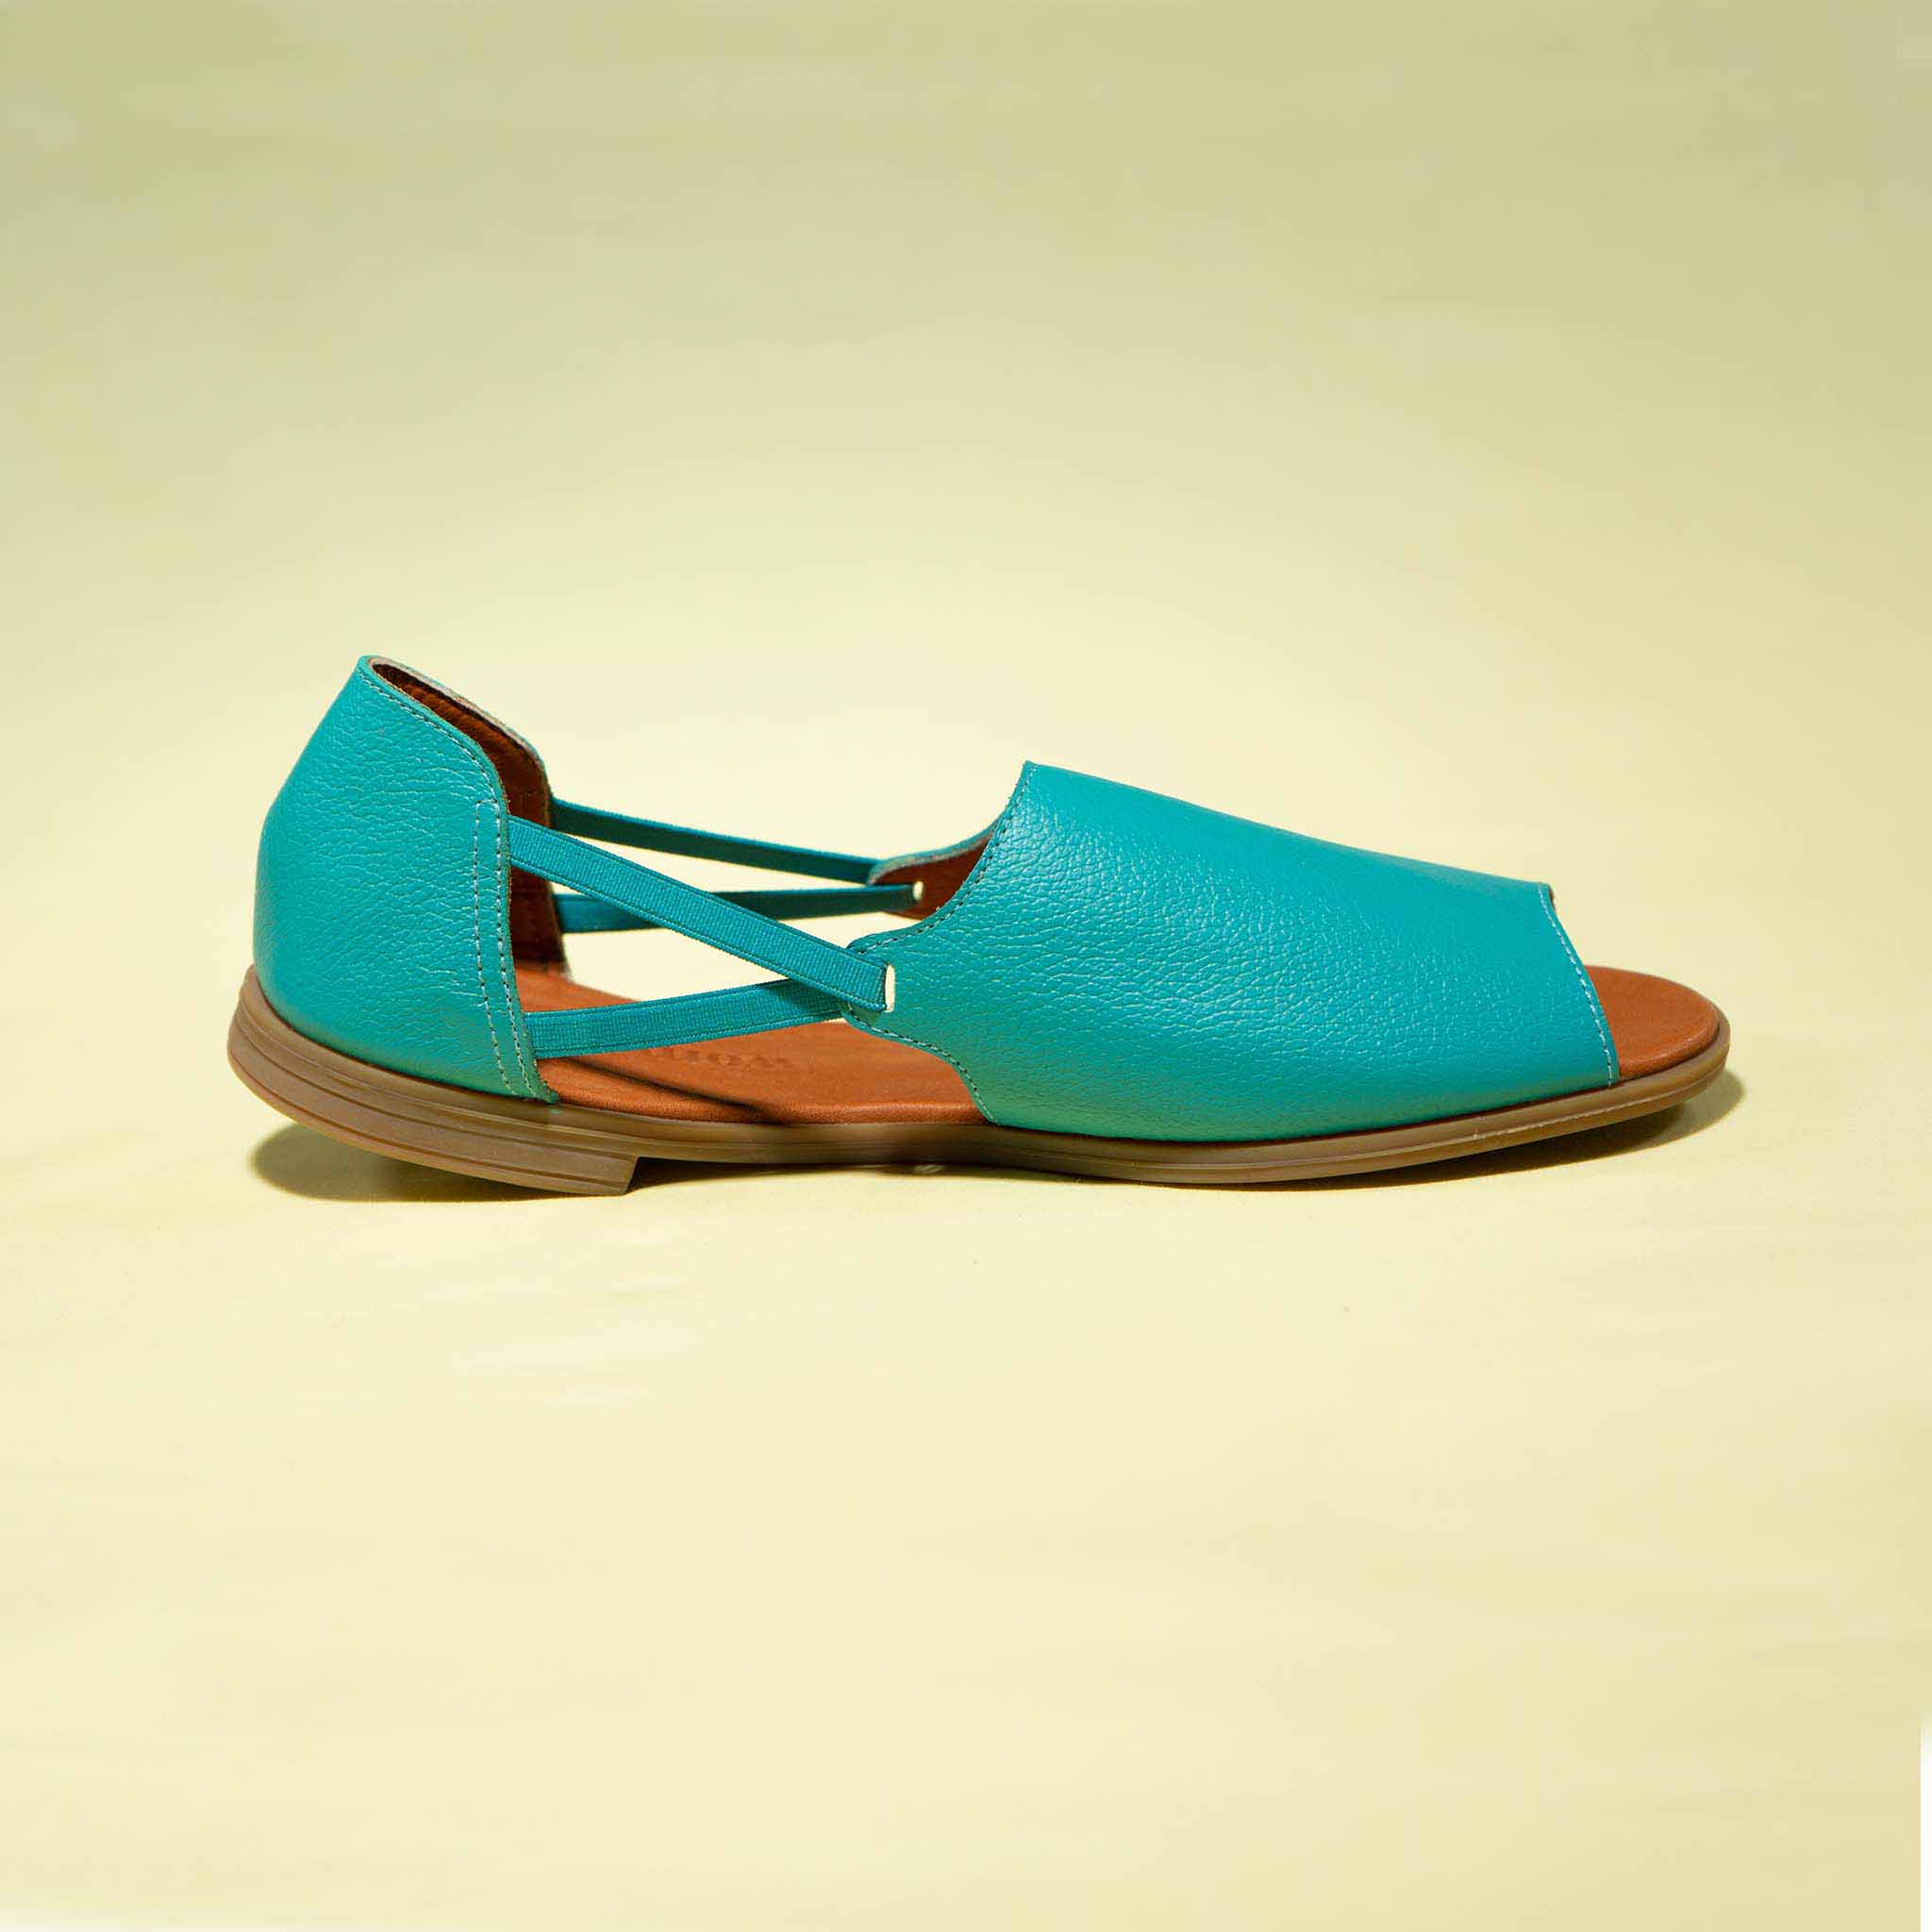 Womads turquoise sandals side view